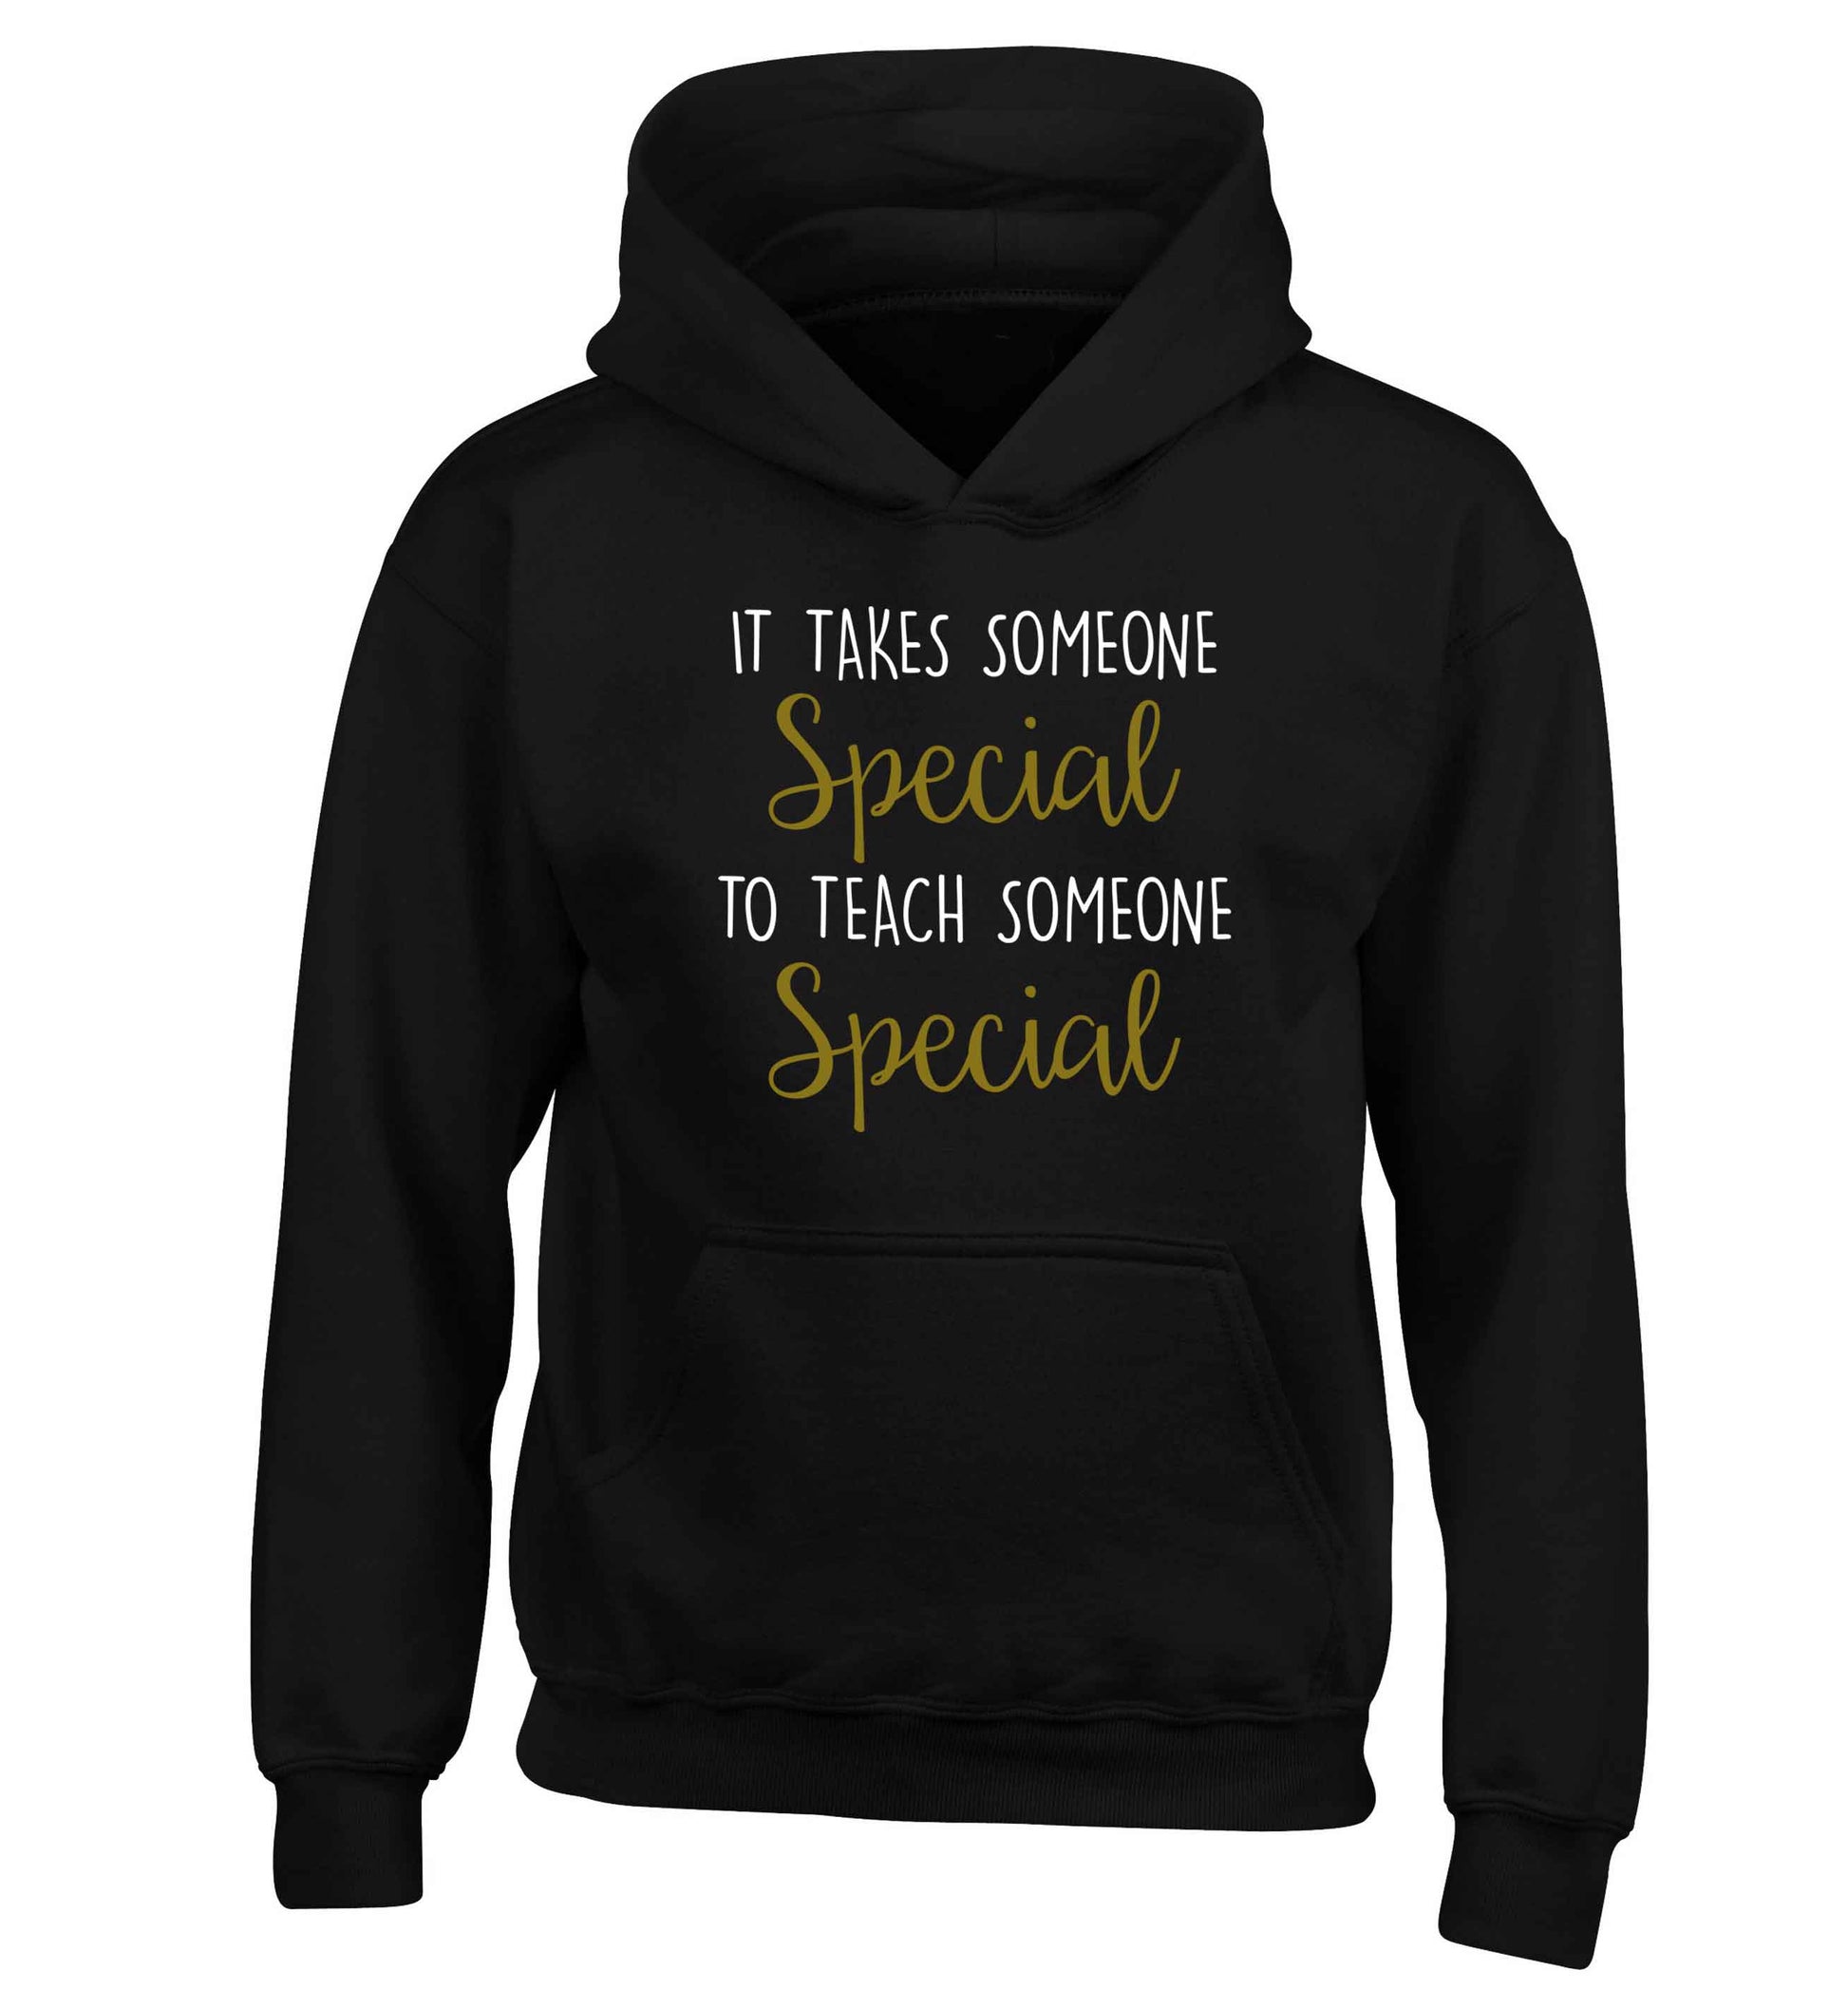 It takes someone special to teach someone special children's black hoodie 12-13 Years